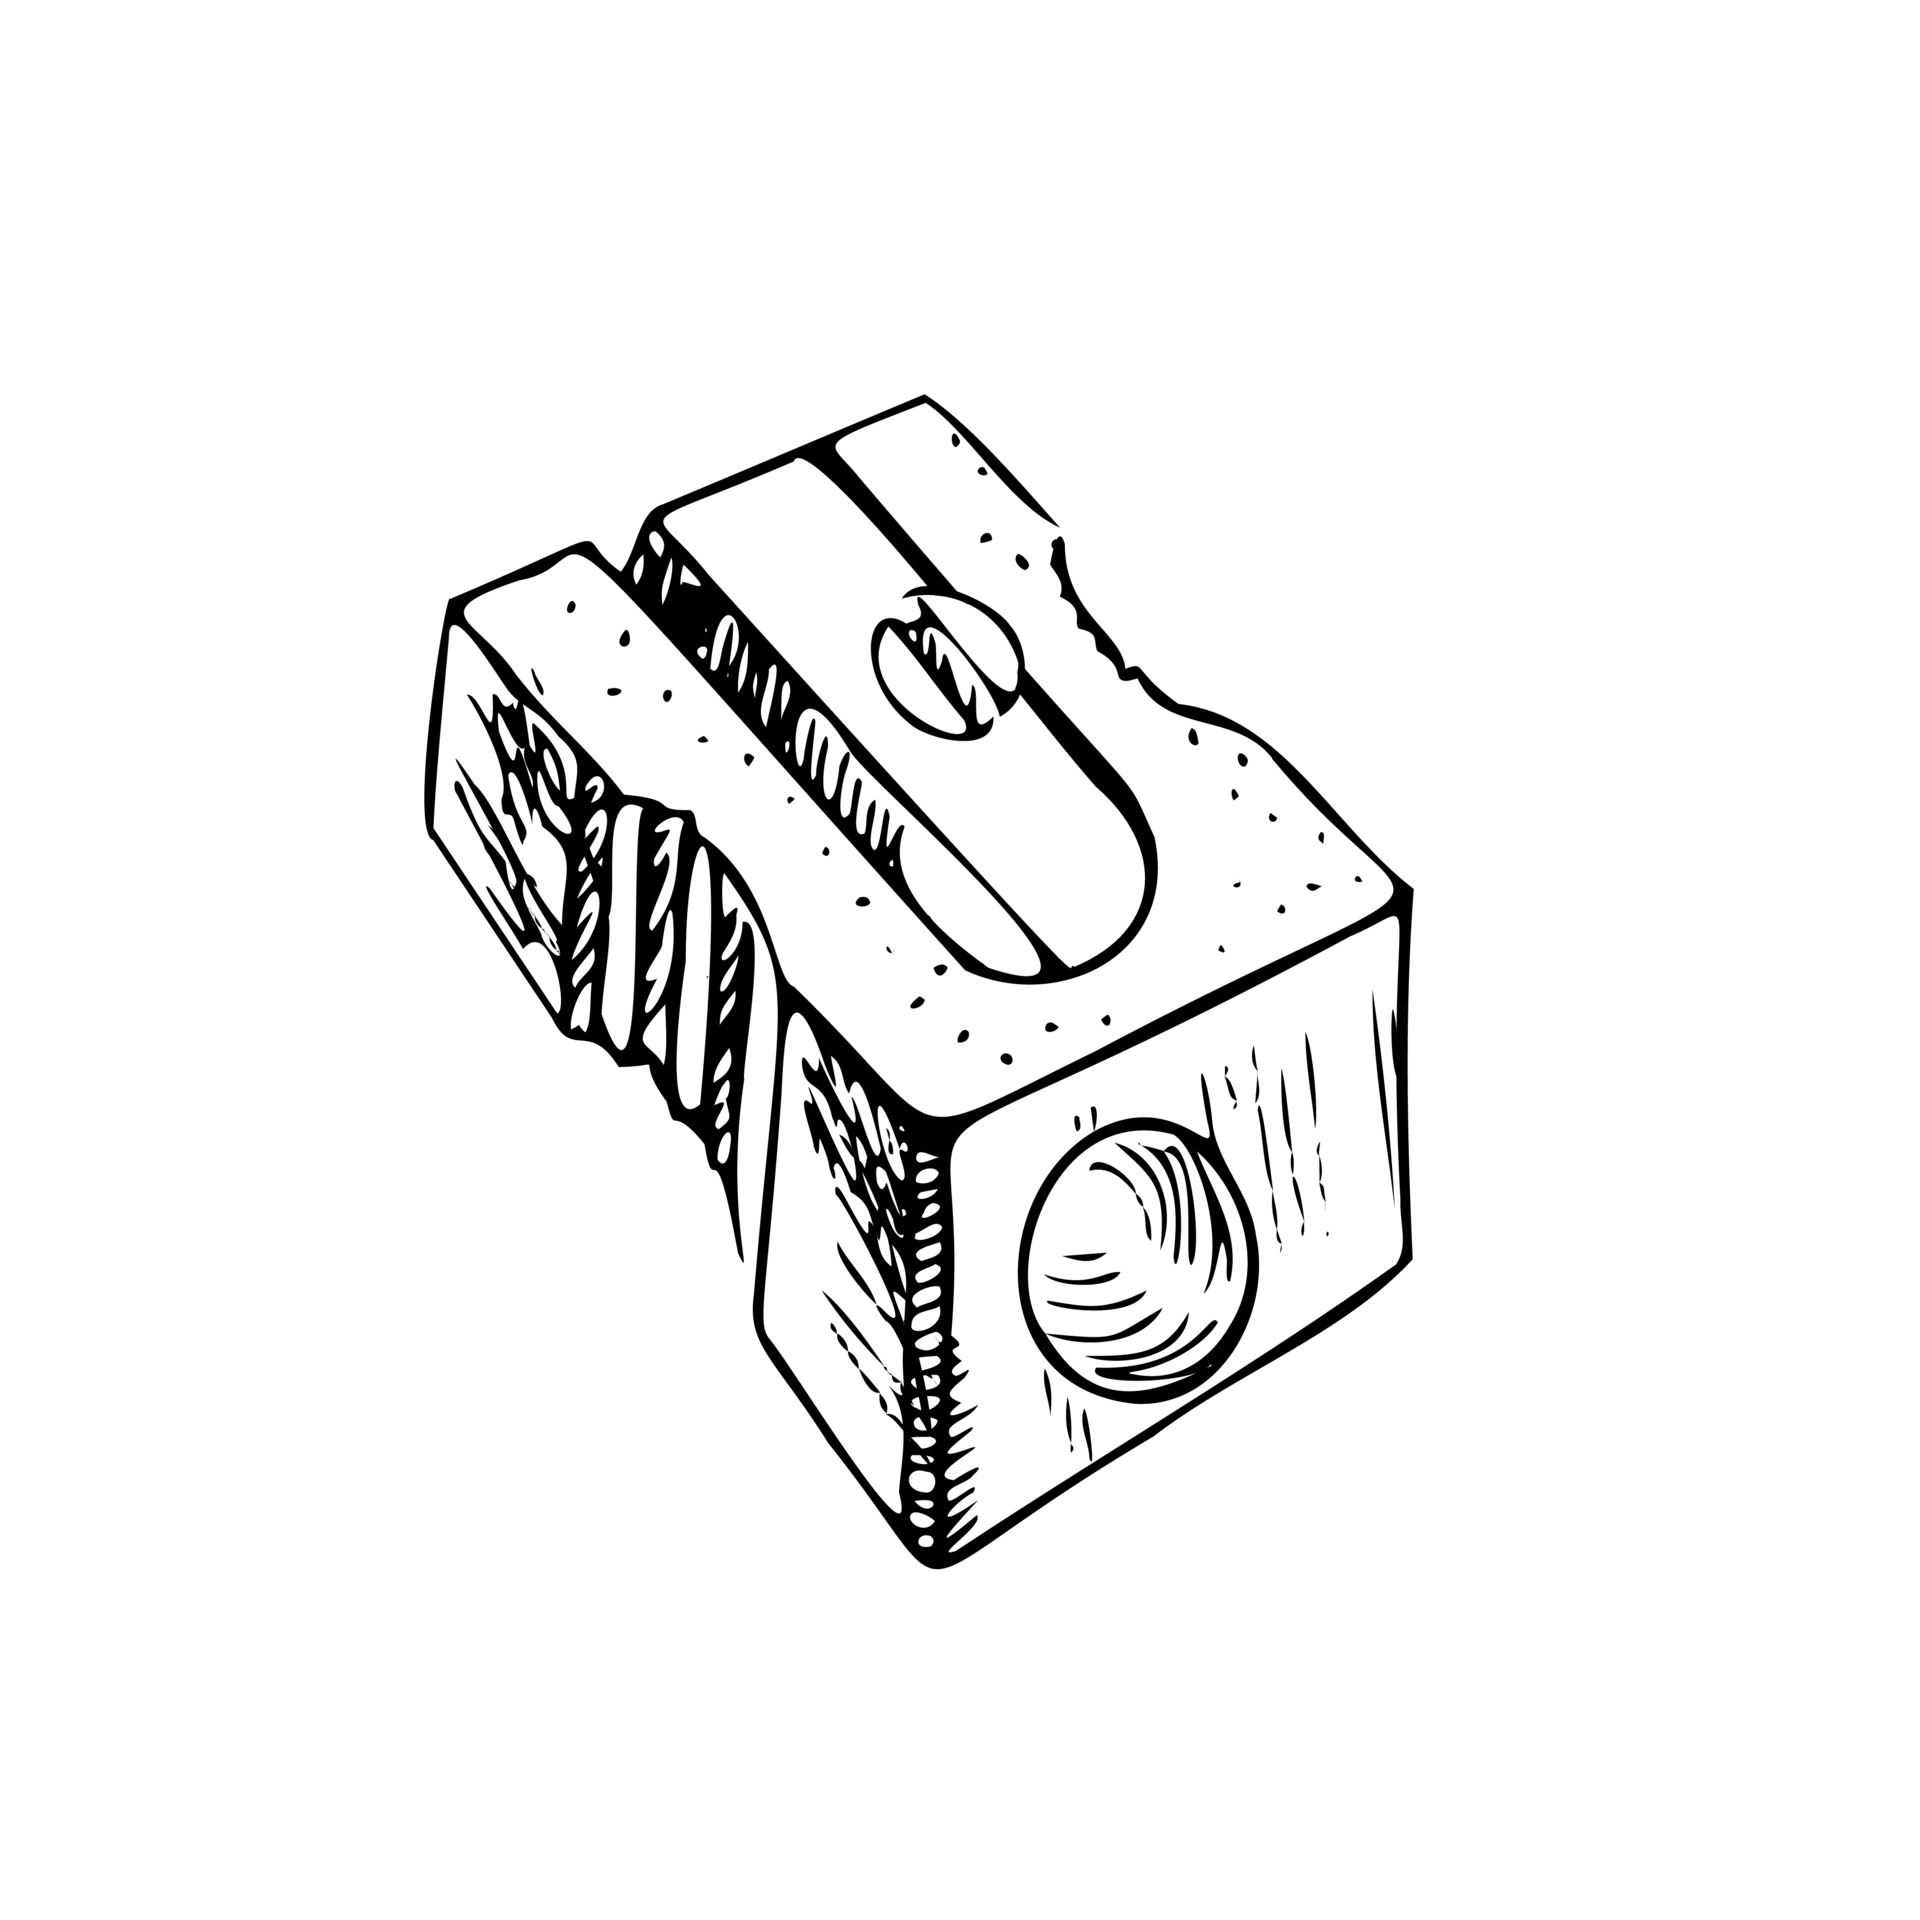 https://static.vecteezy.com/system/resources/previews/003/566/702/original/hand-drawn-school-and-office-supplies-illustration-detailed-retro-style-sharpener-sketch-vintage-sketch-element-back-to-school-school-essential-illustration-vector.jpg